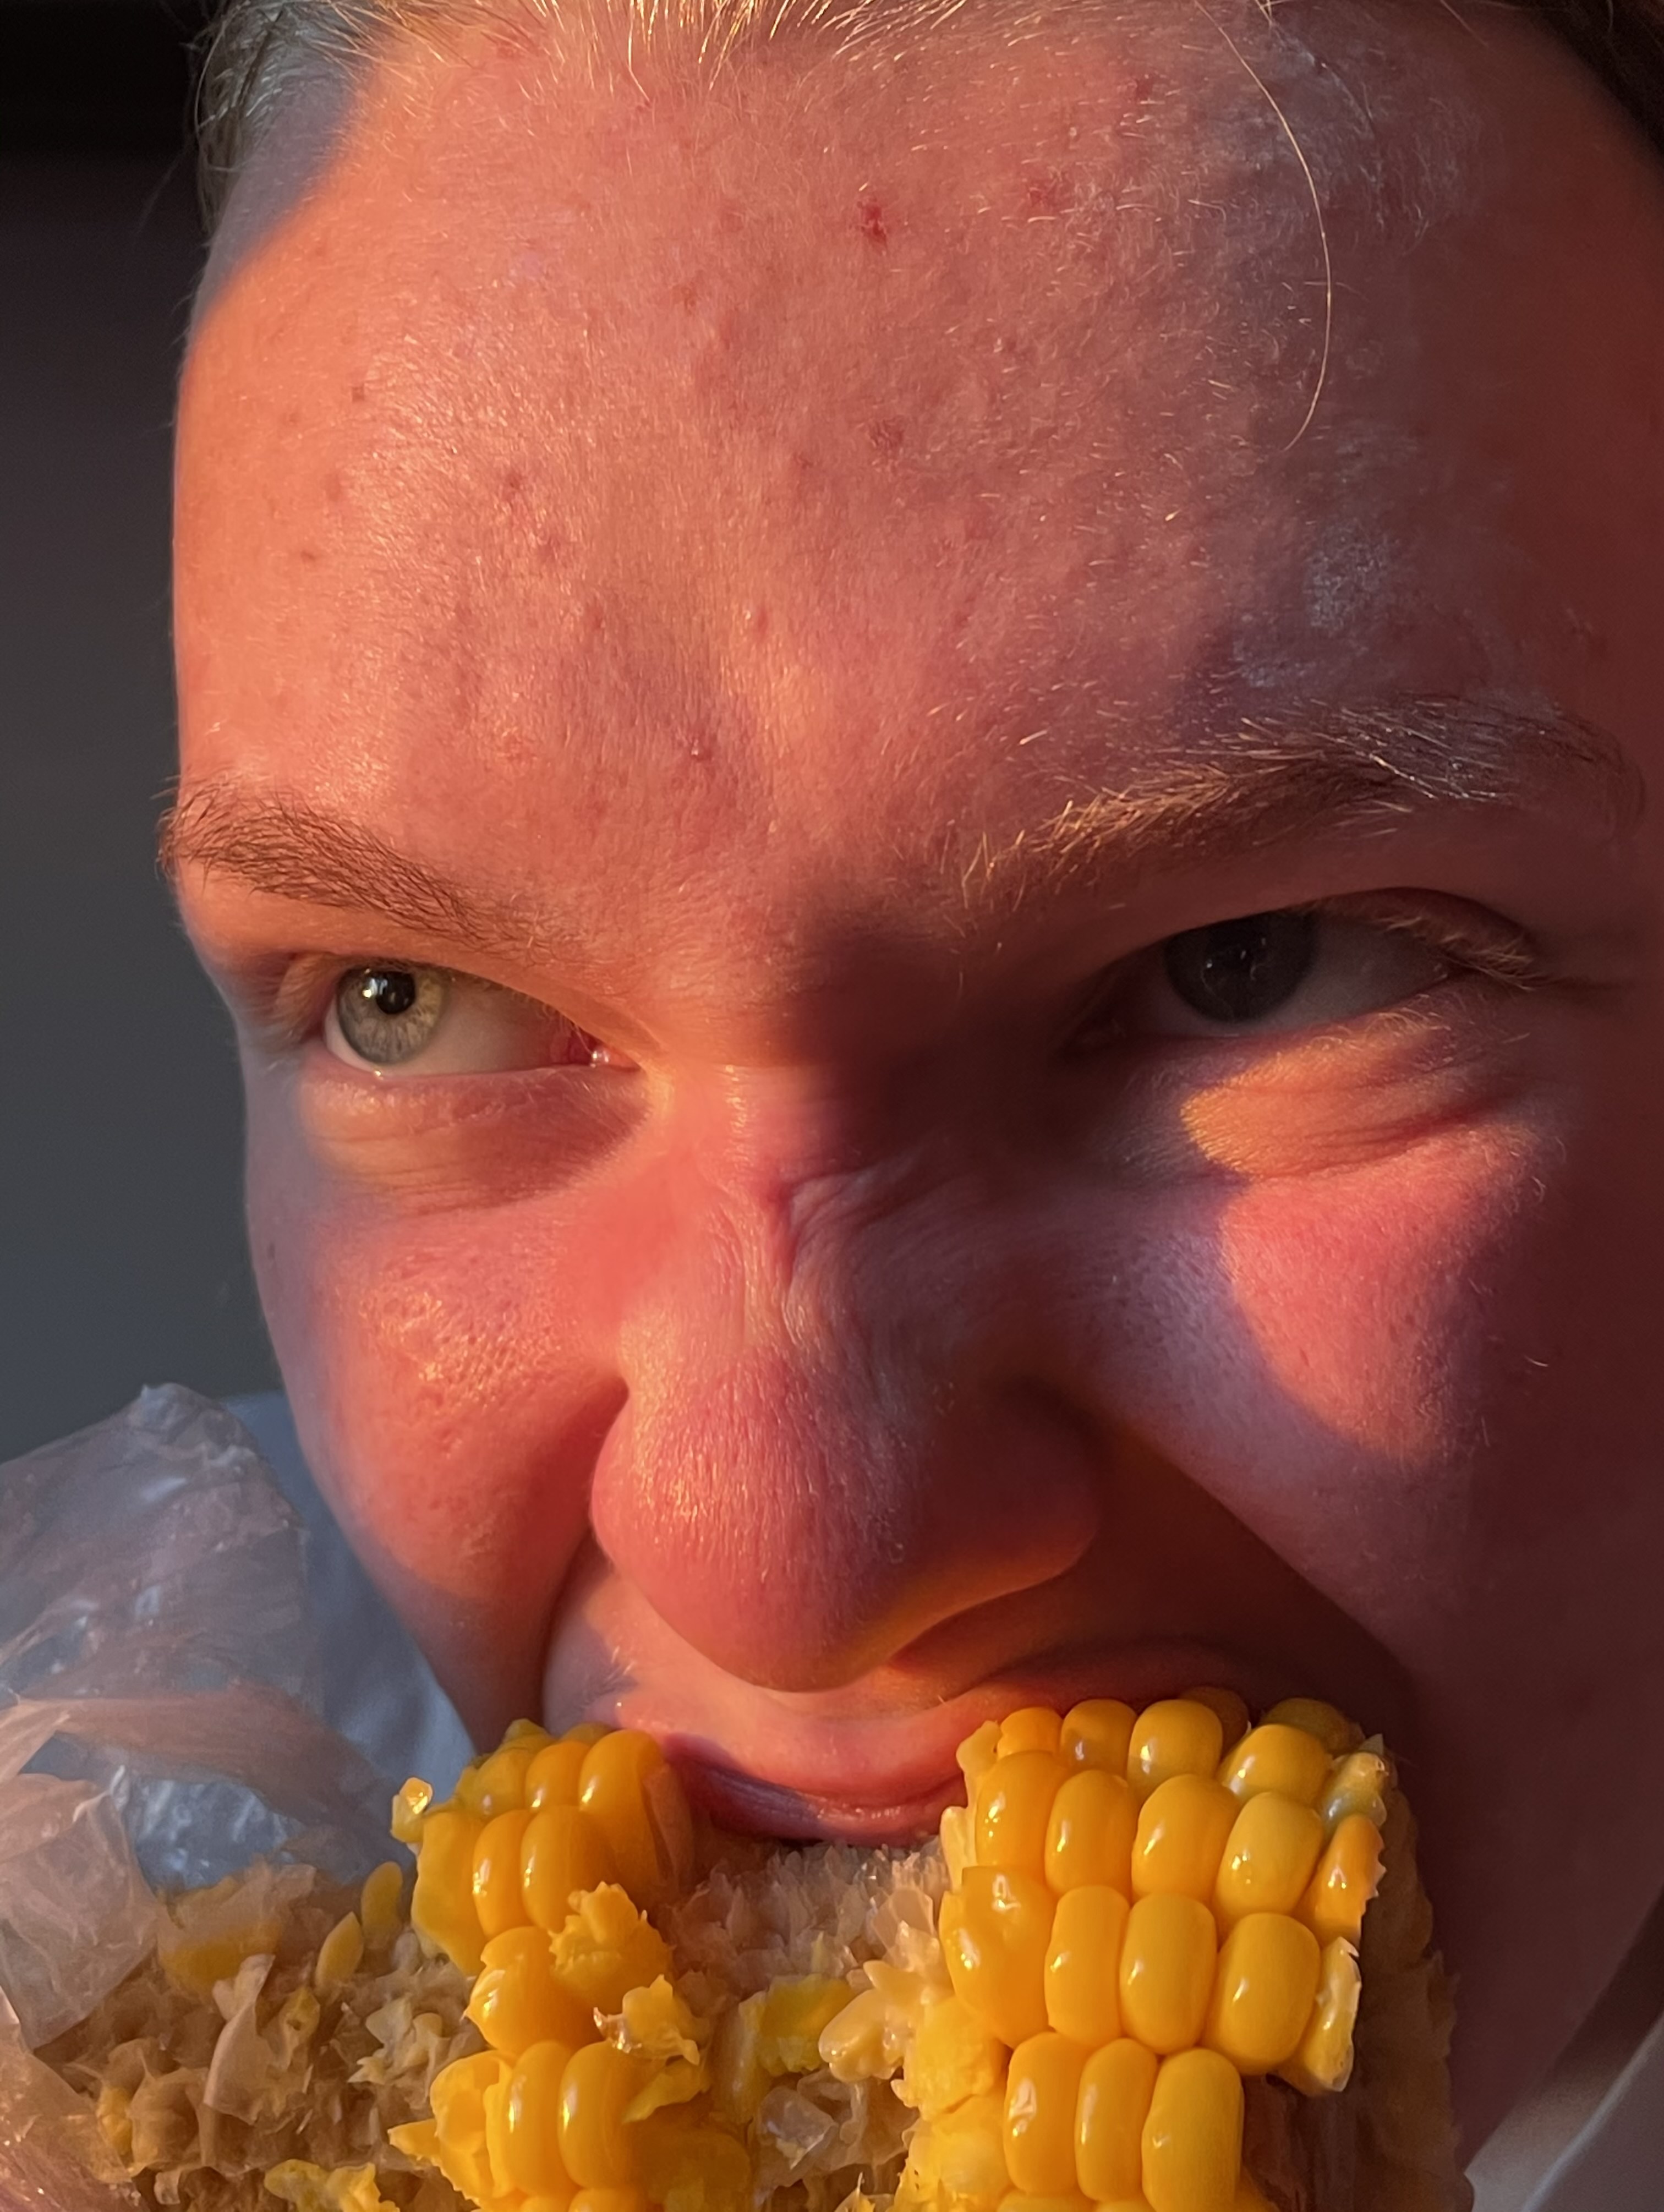 Close up of someone biting into a corn on the cob.